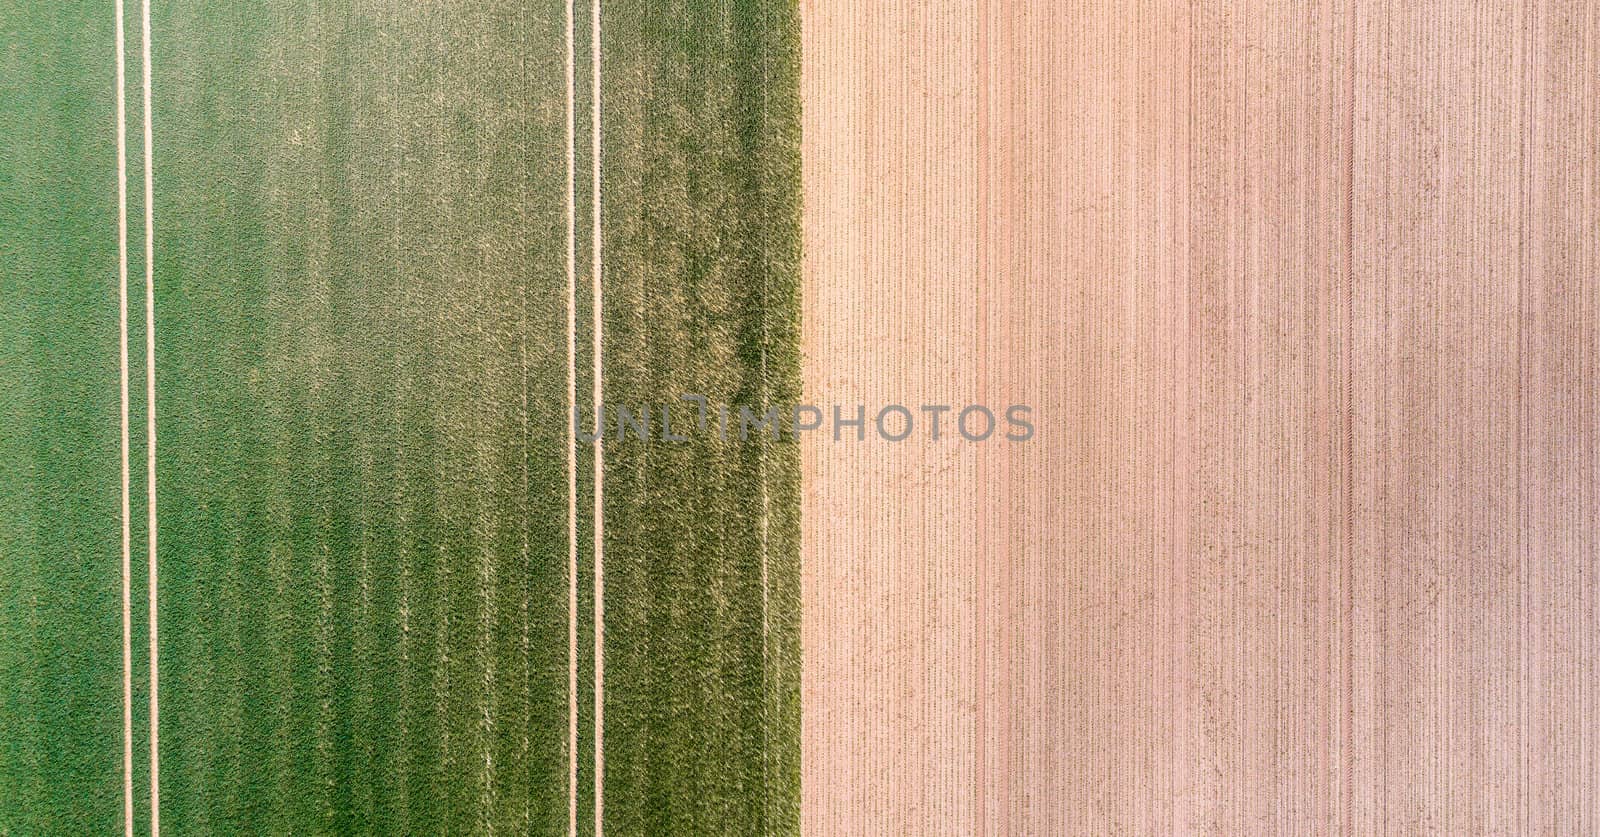 Vertical aerial view of a field with green sprouting young vegetation and a yellow ungreen field surface, abstract impression by geogif